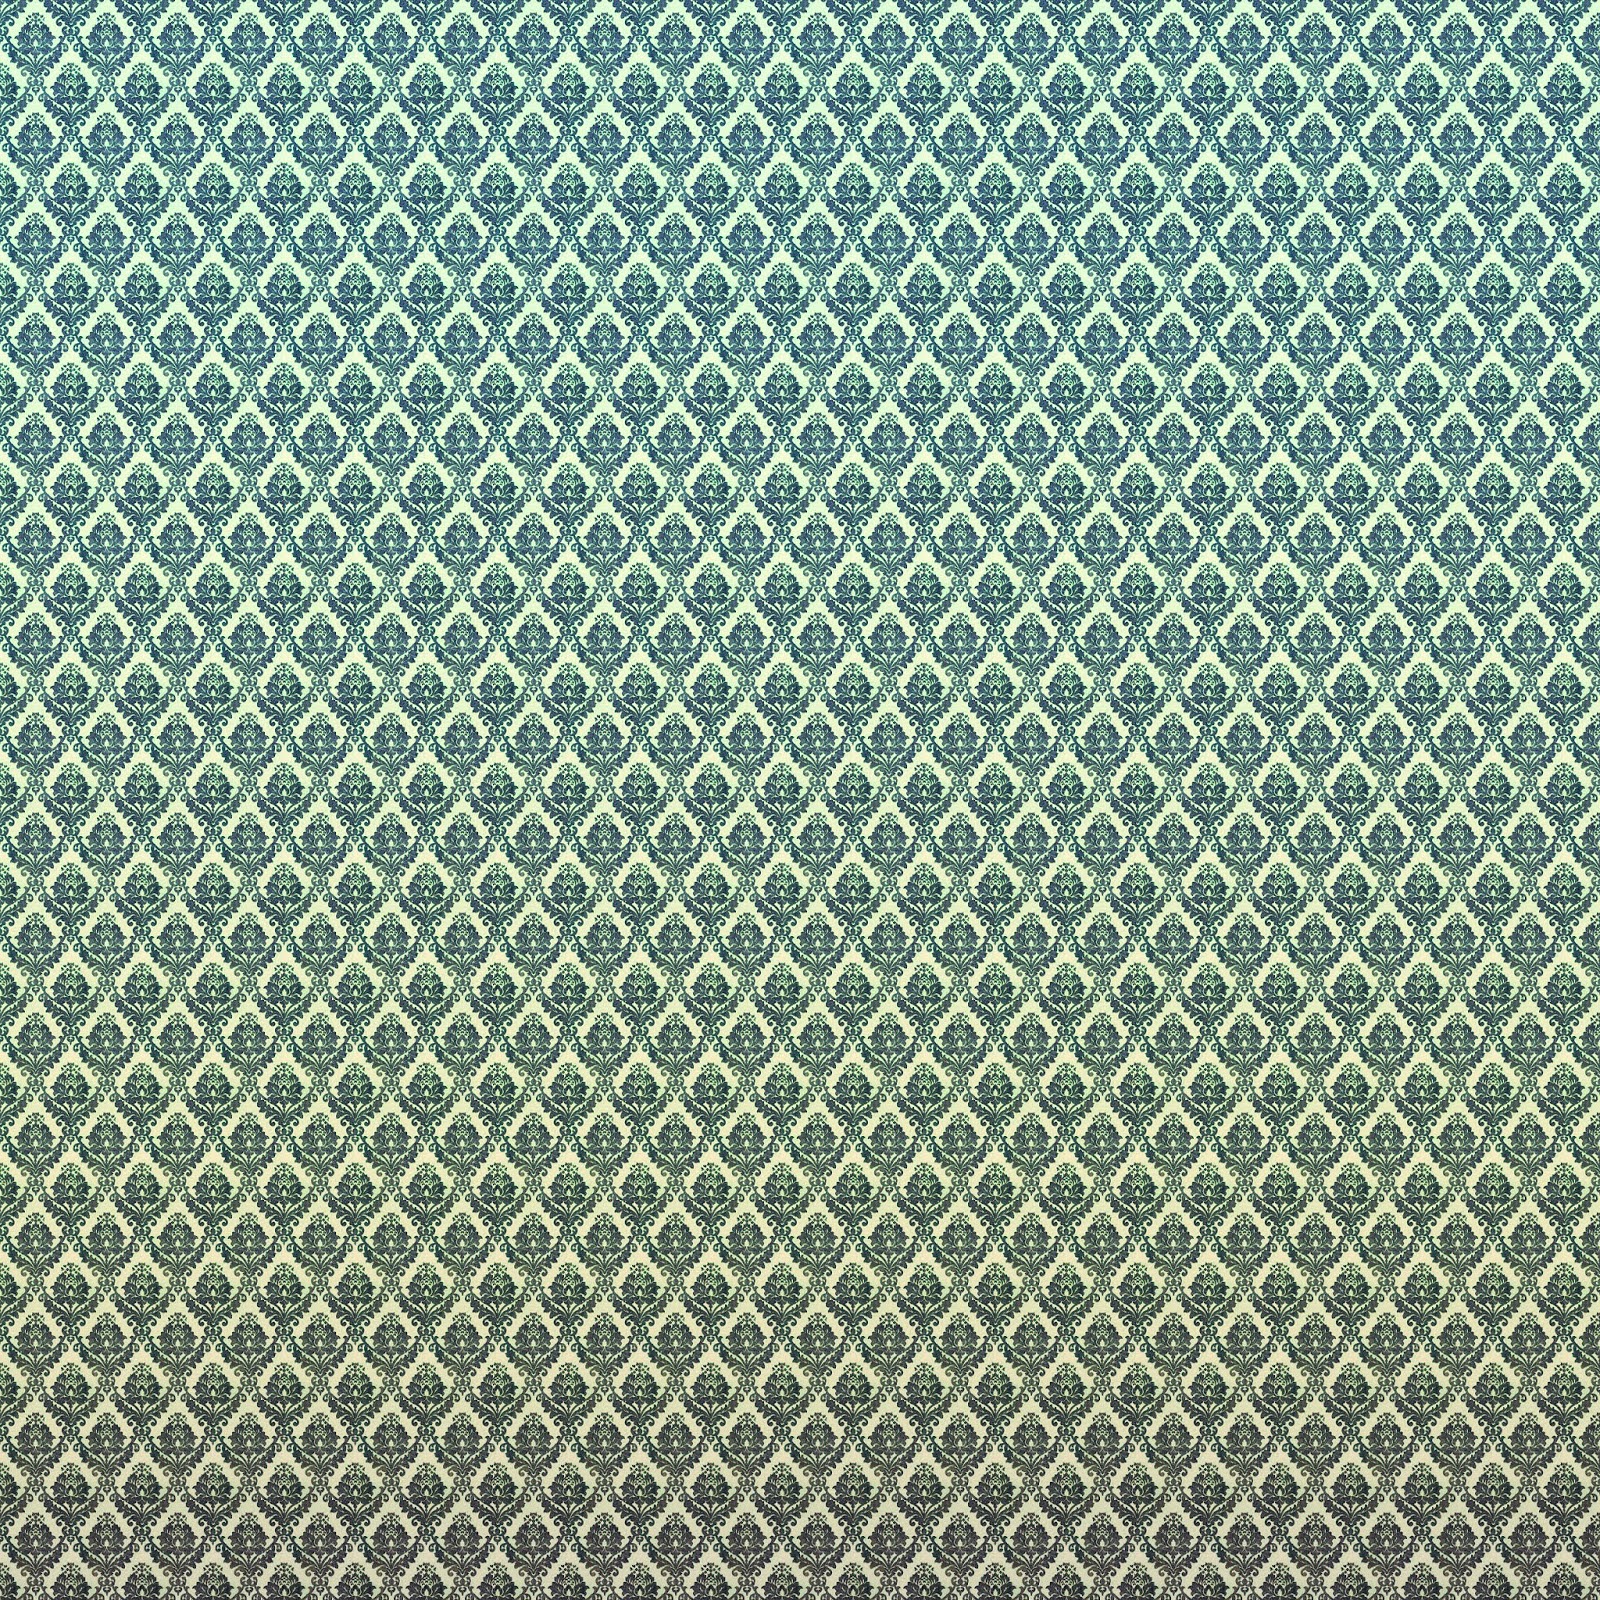 Printable Patterned Paper Free